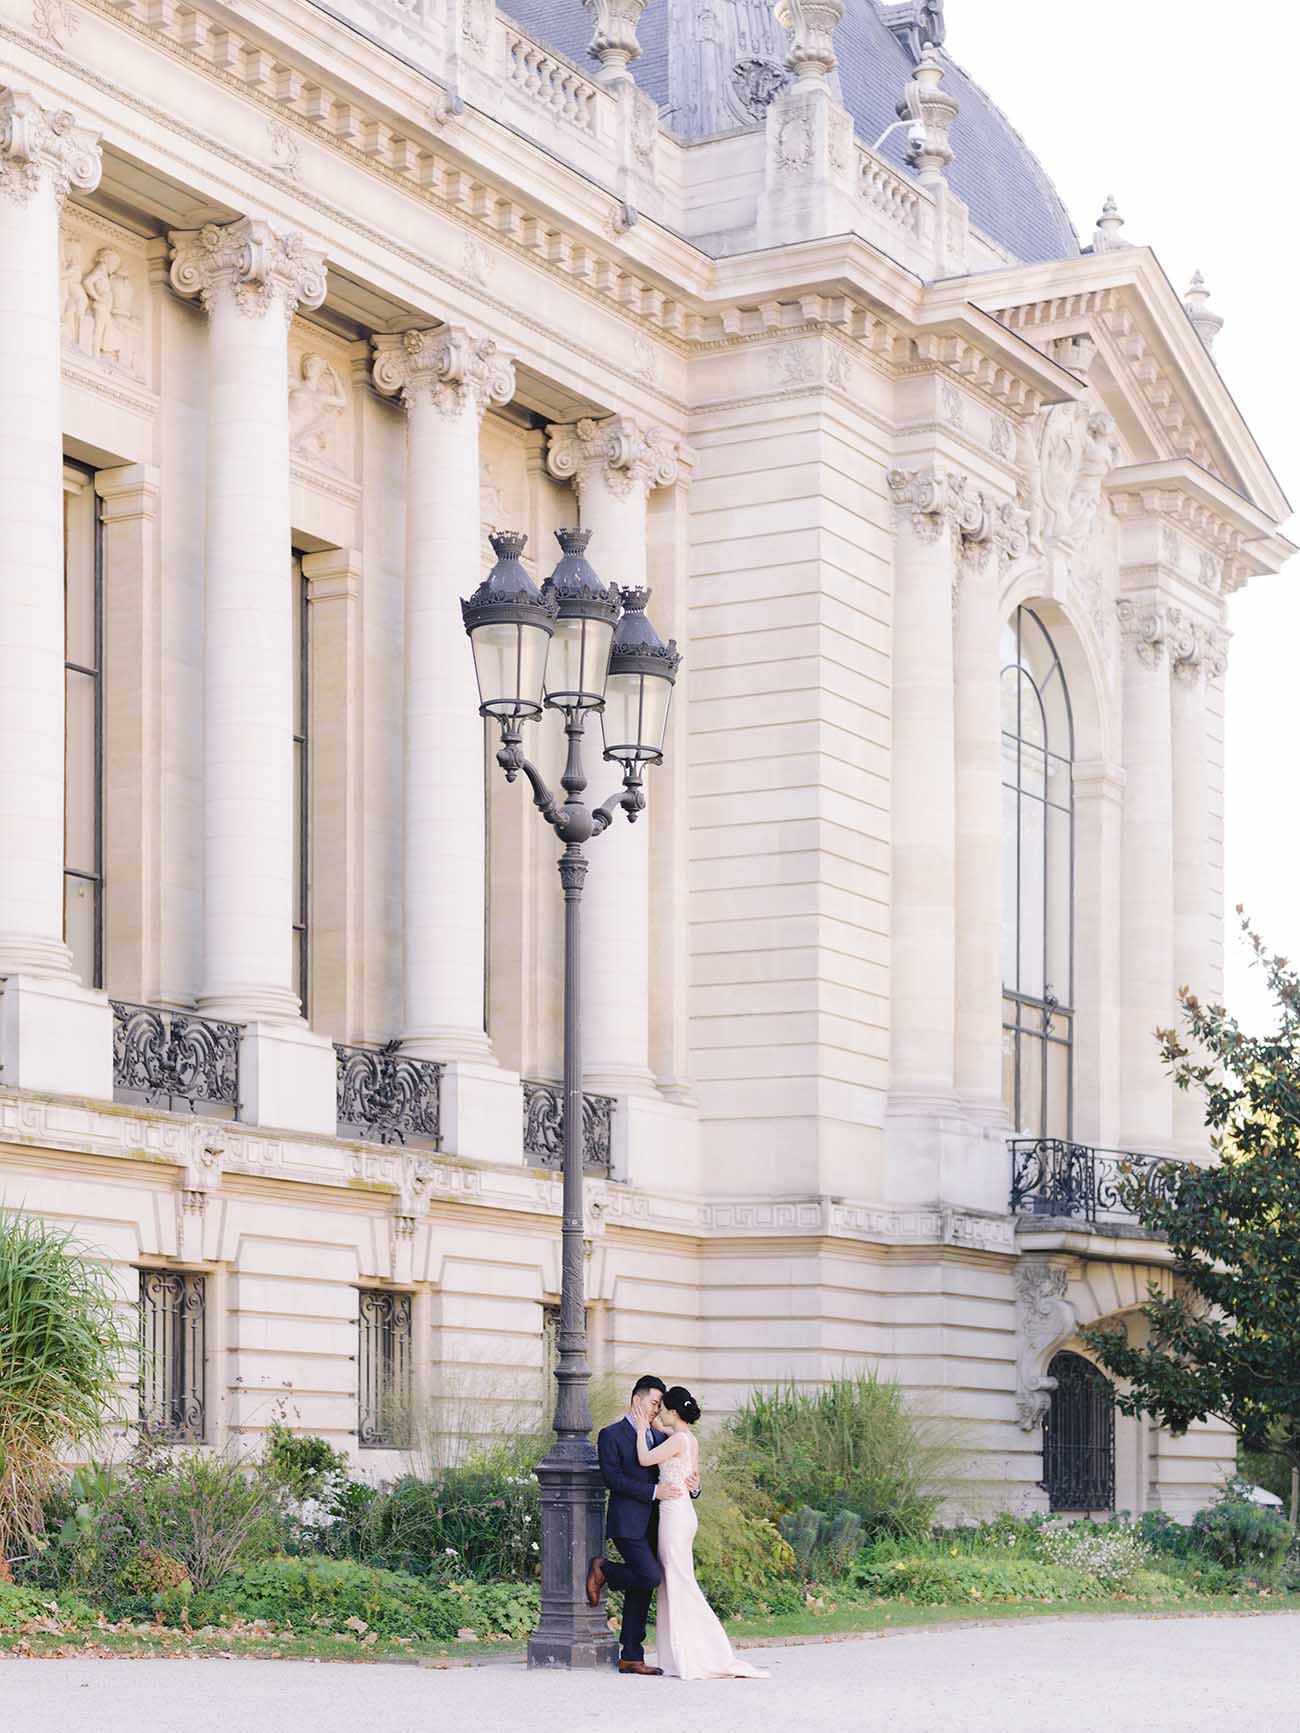  A couple kissing in front of the Petit Palais in Paris